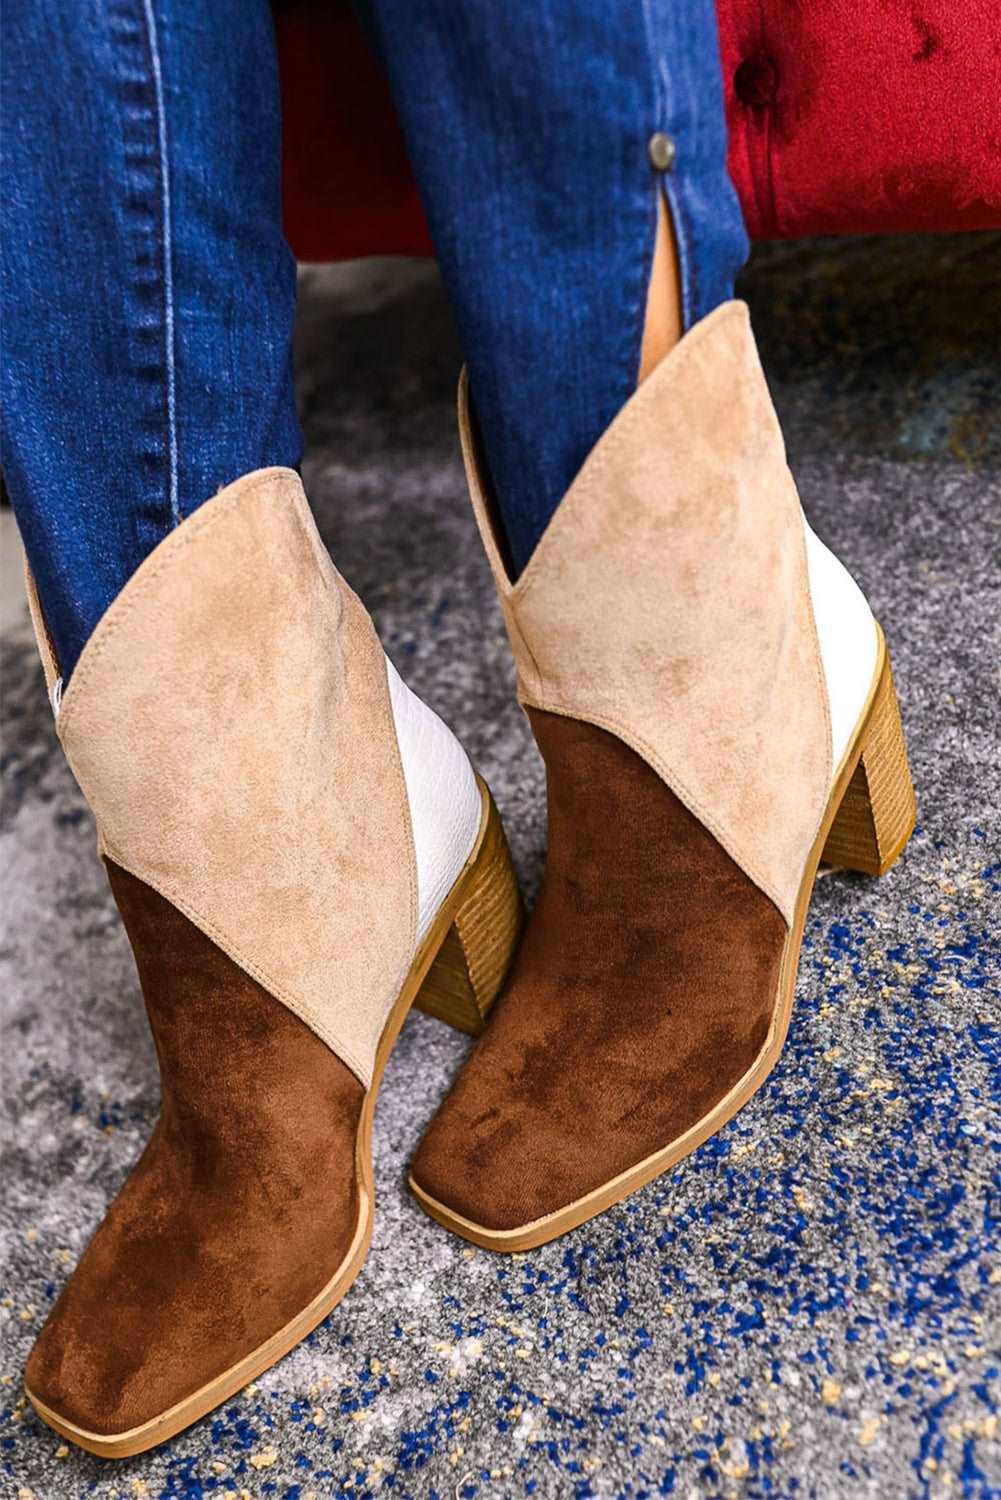 Chic Contrast Heeled Ankle Boots